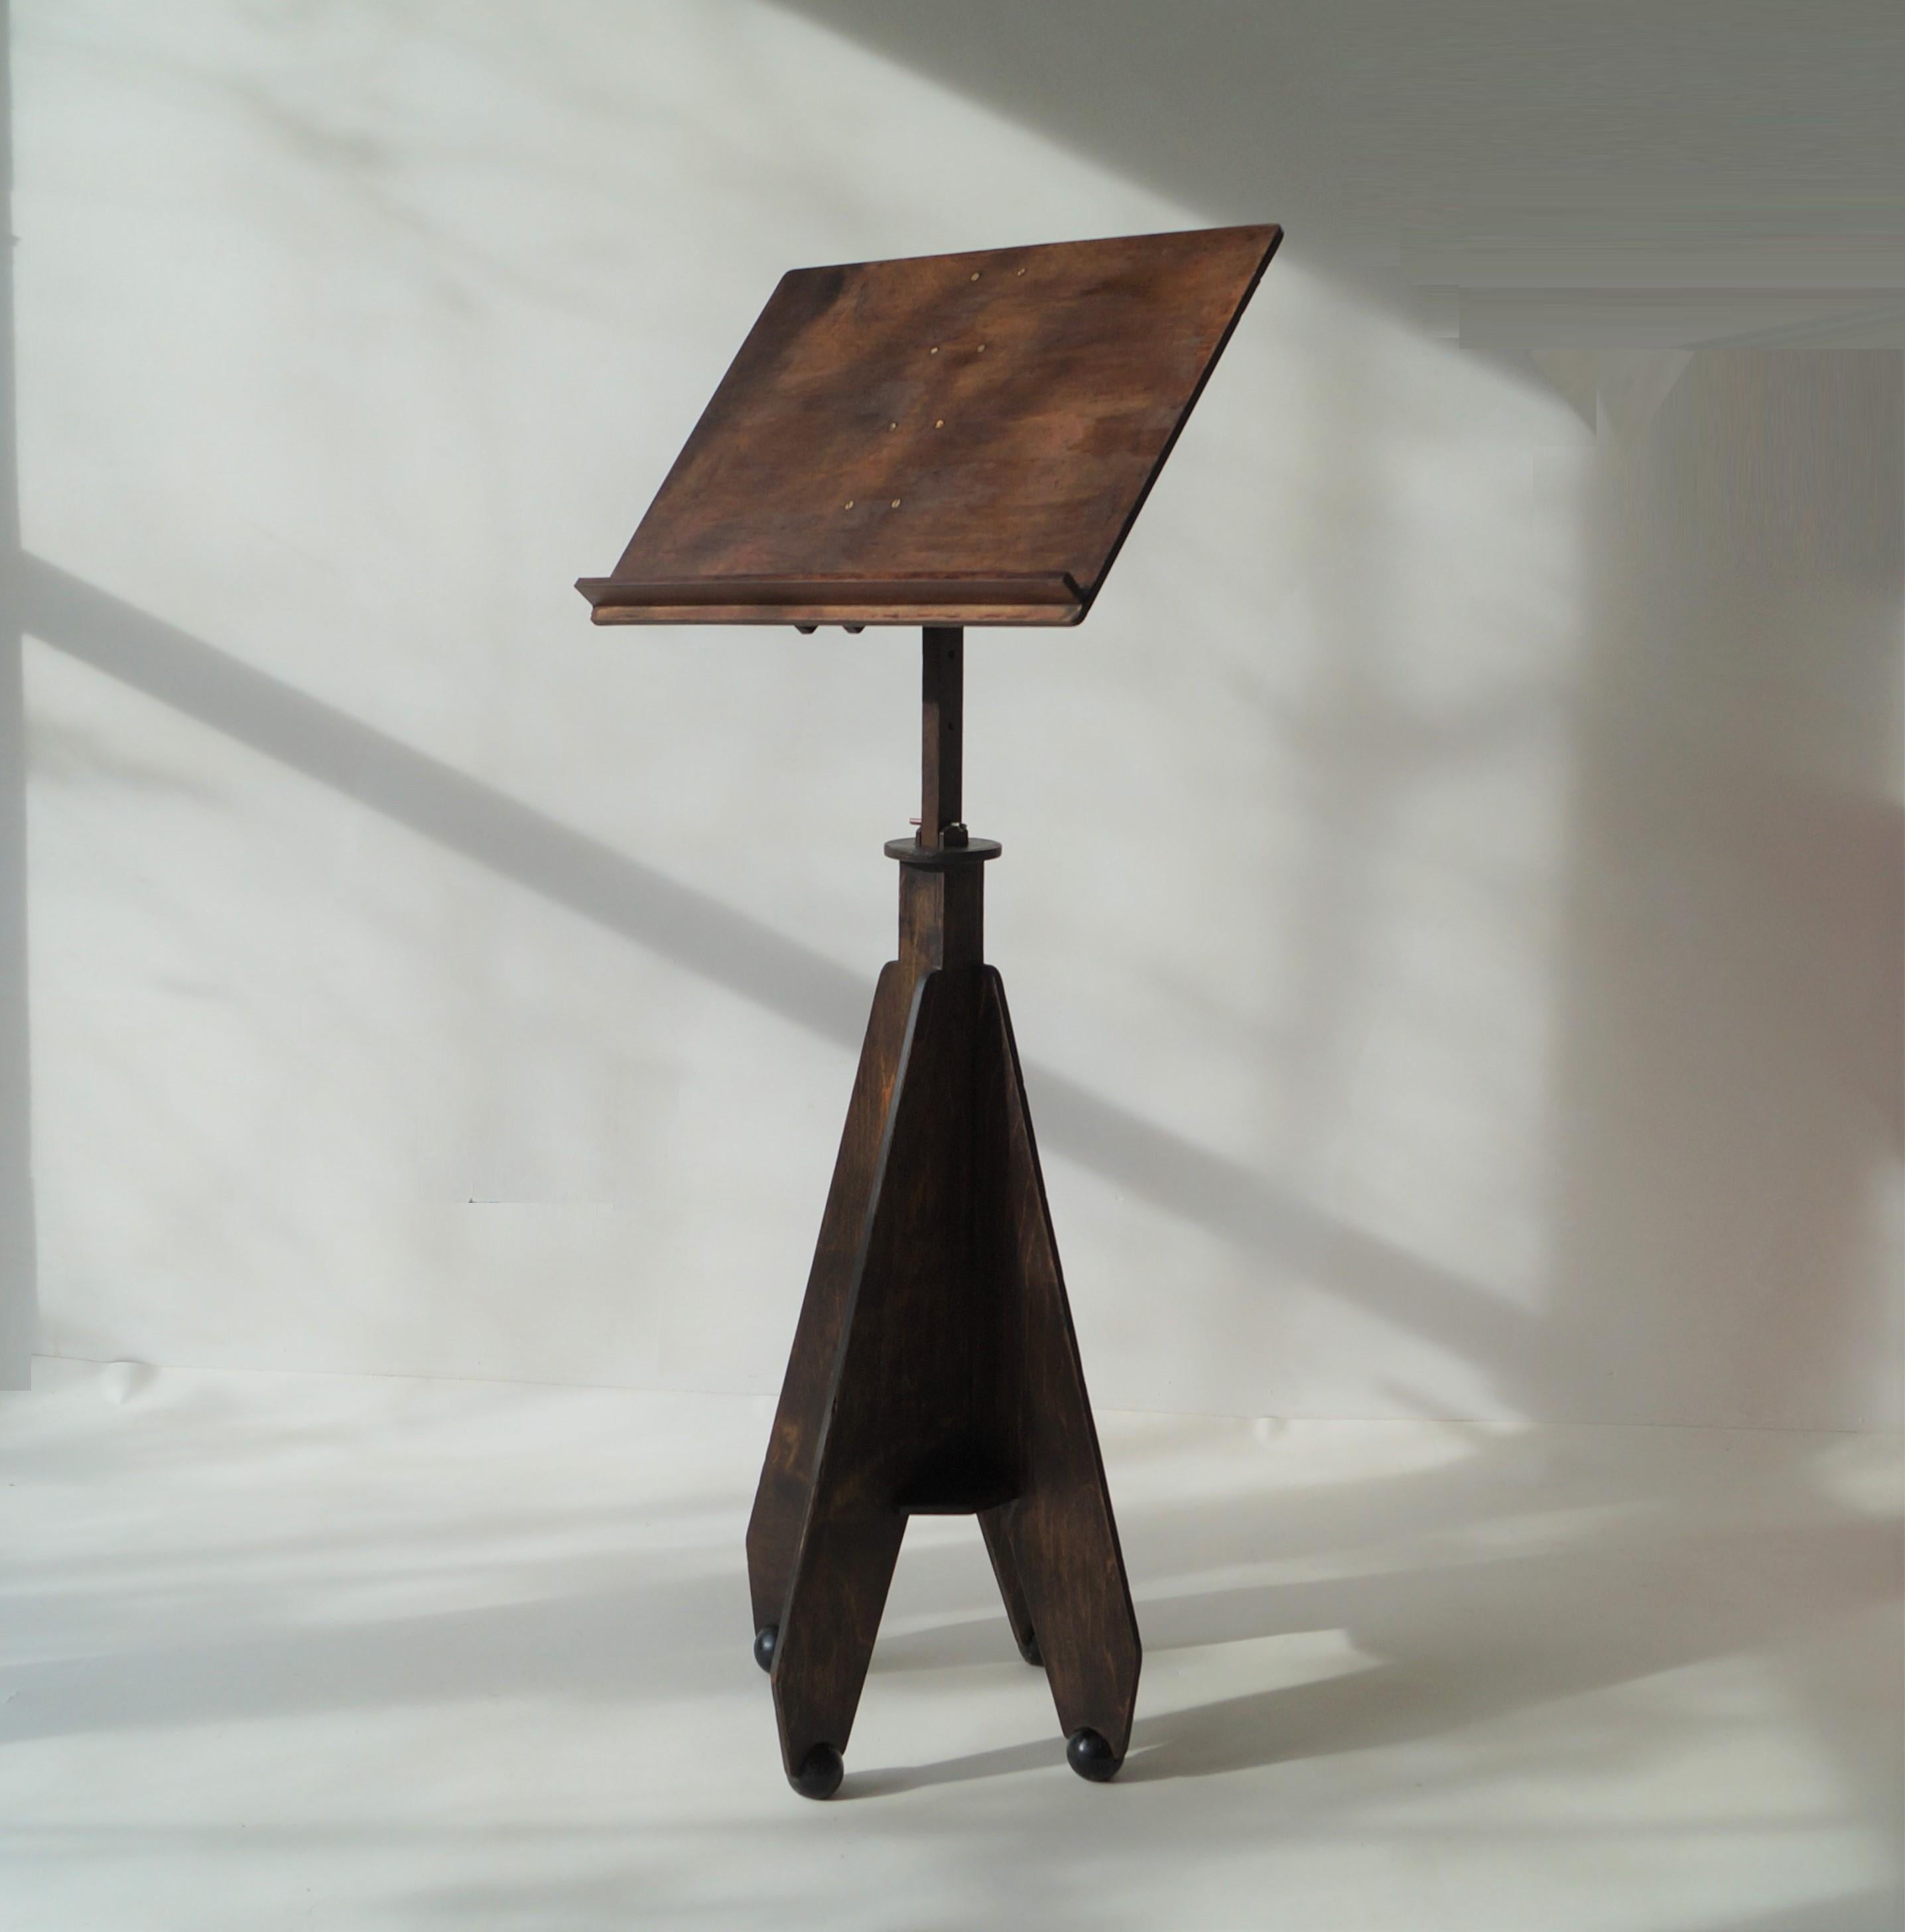 A very rare original 1930s sheet music stand from the Amsterdam Academy of Music/Conservatoire. Style is Amsterdam School (of the period). The stand is adjustable in height and has a special asymmetrical design in the base. Base and lectern made